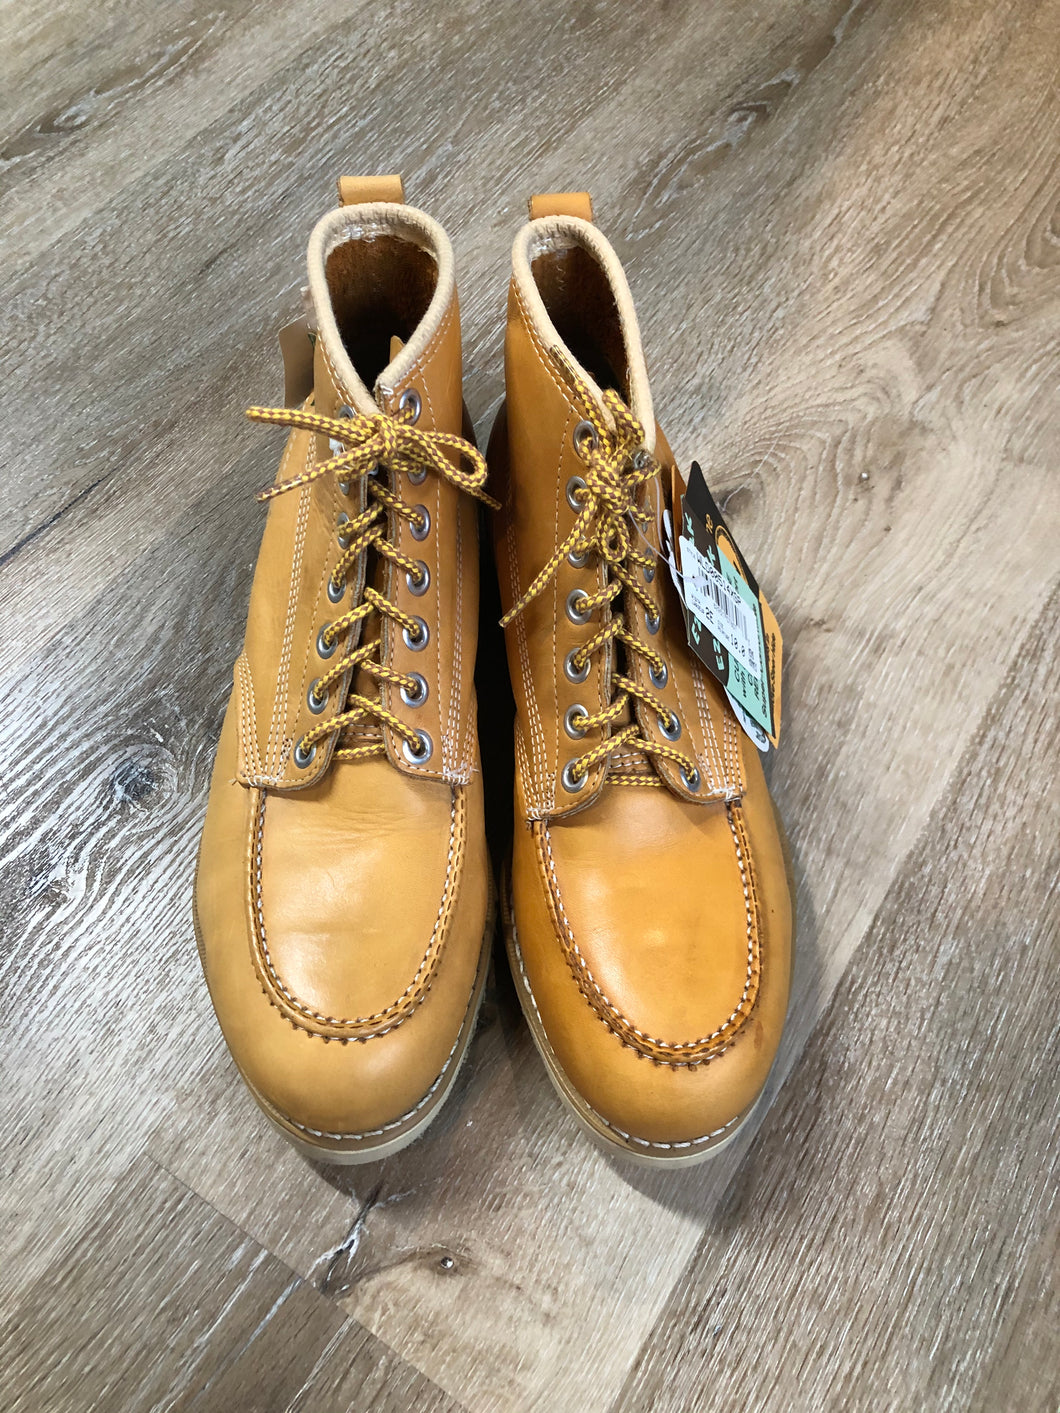 Vintage Gorilla CSA approved full grain leather 7 eyelet lace up work boots in tan with steel toe and steel plate insole to protect against injury, electric shock resistant, 